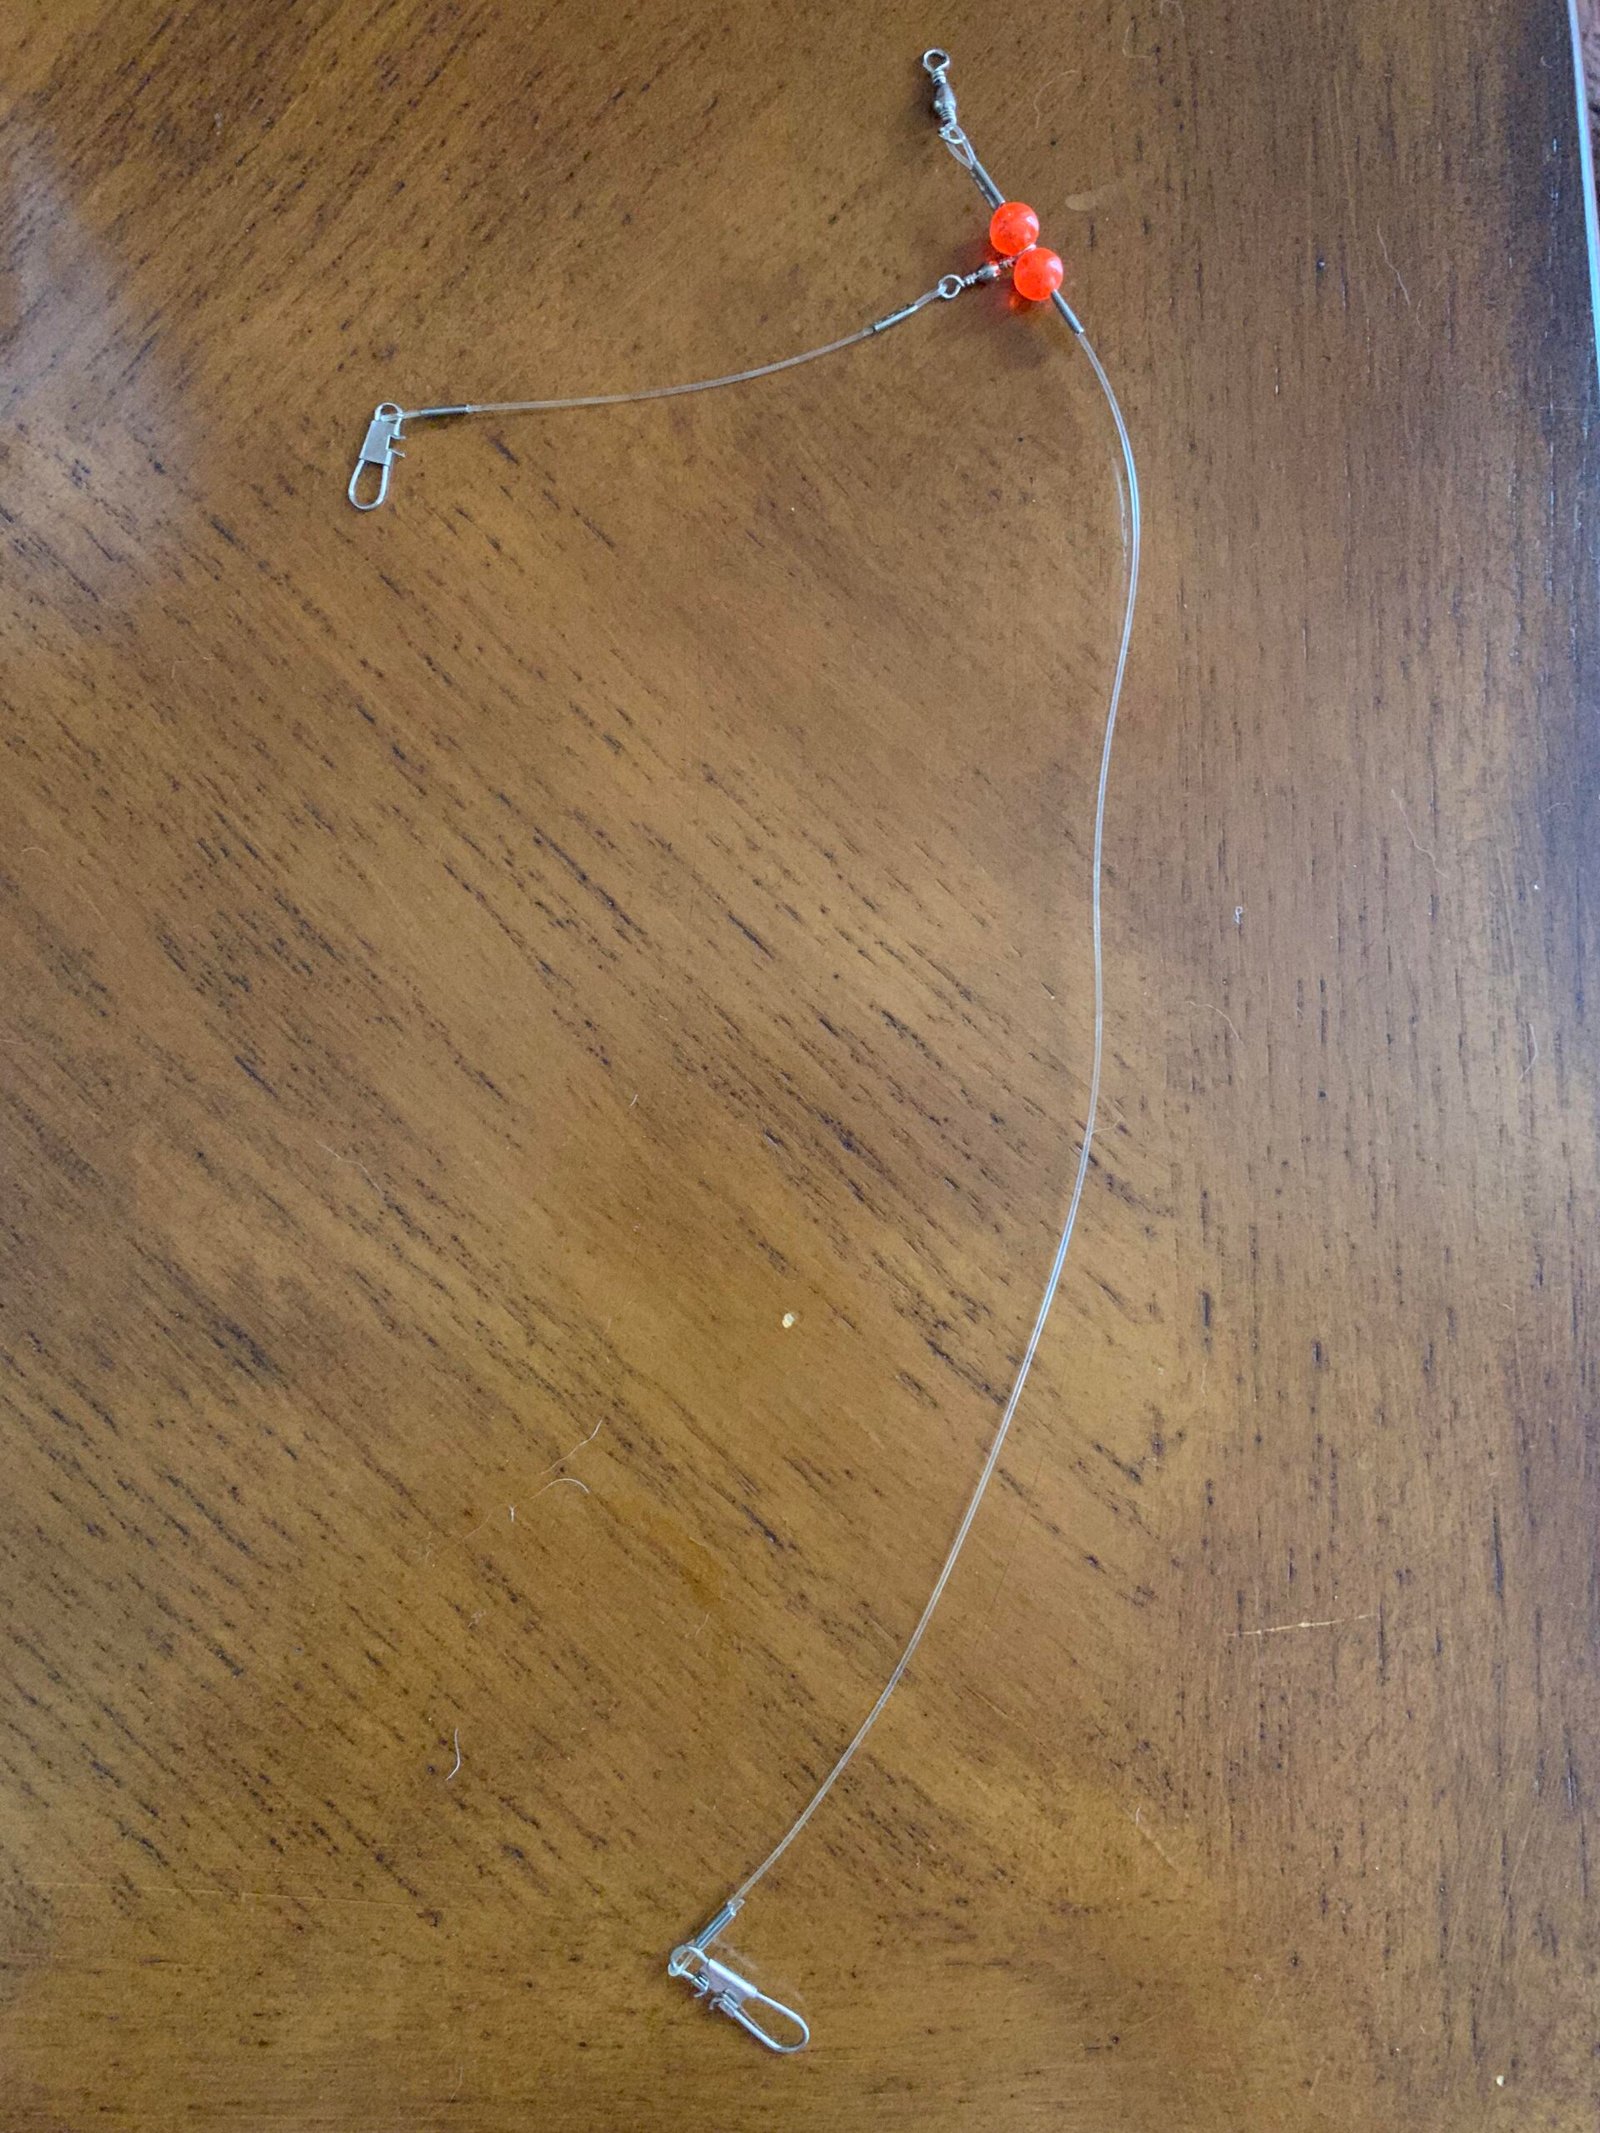 How Can a Hook Be Attached to a Fishing Line?